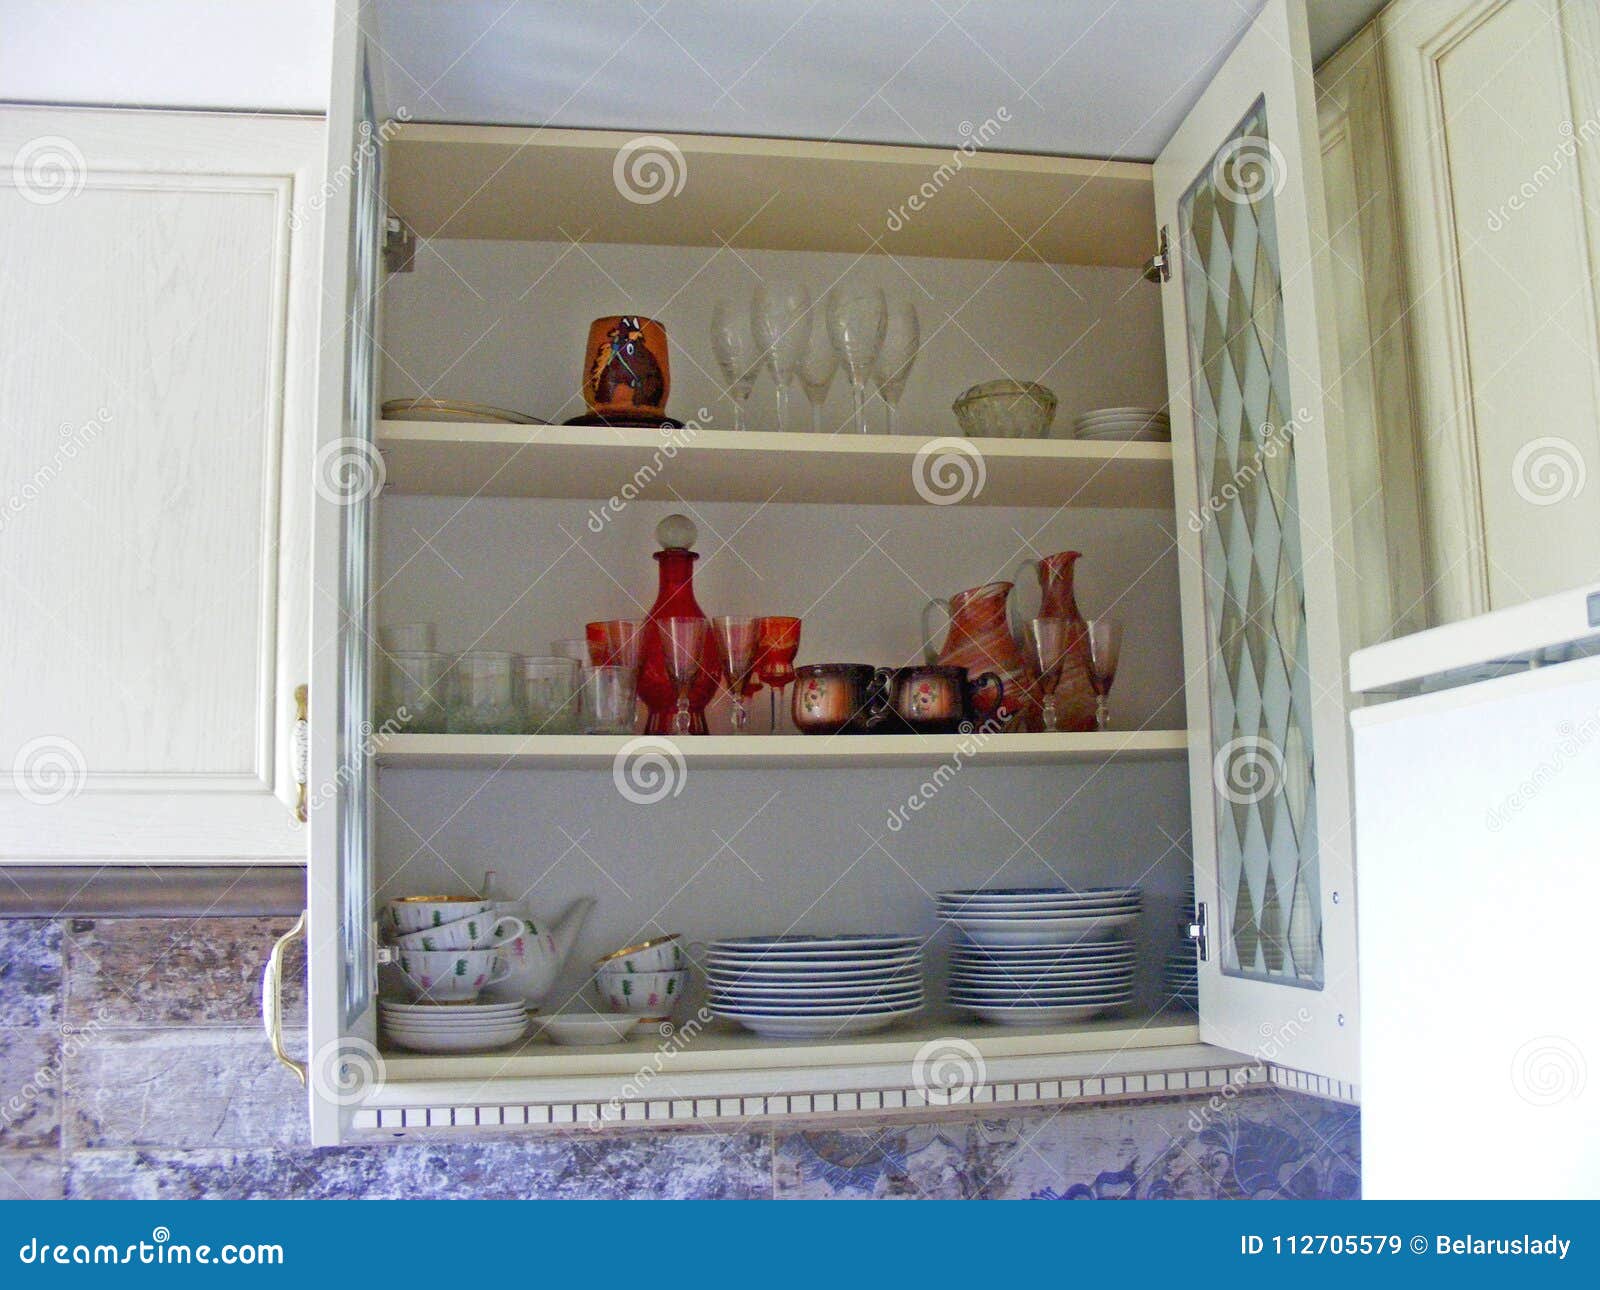 Kitchen Cabinet Close Up With Glass Shelves And Glasses Stock Image Image Of Design